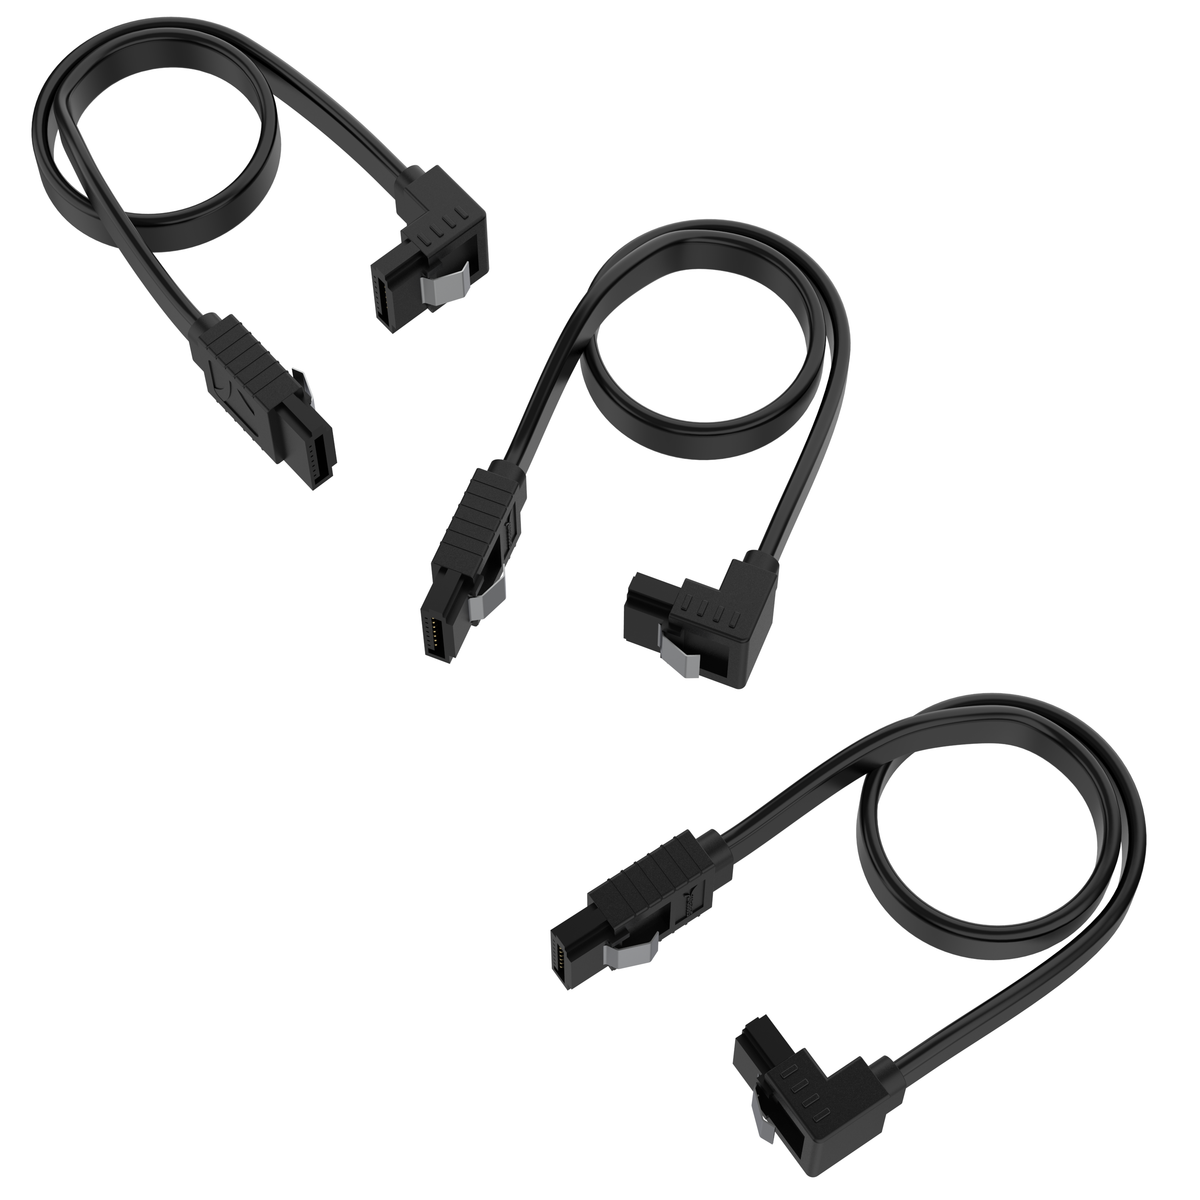 SATA III (6 Gbit/s) Right Angle Data Cable with Locking Latch for HDD / SSD / CD and DVD drives (3 Pack - 20-Inch)